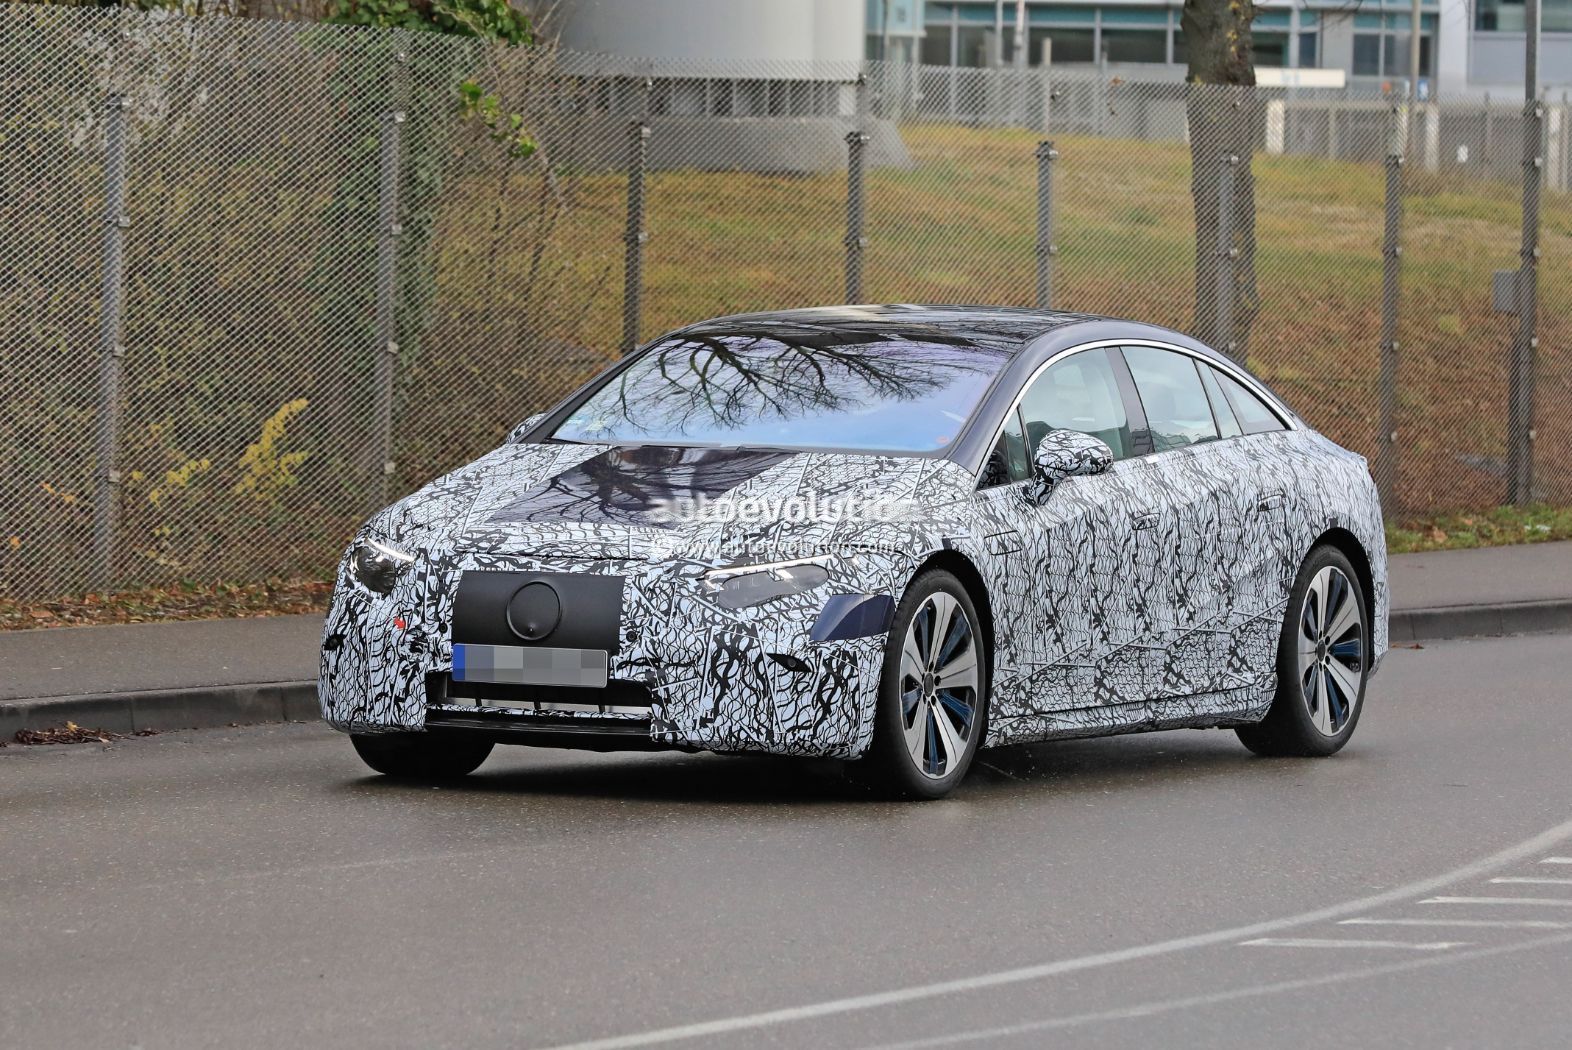 2022 Mercedes-Benz EQS With Less Camo Looks Less Sleek Than the